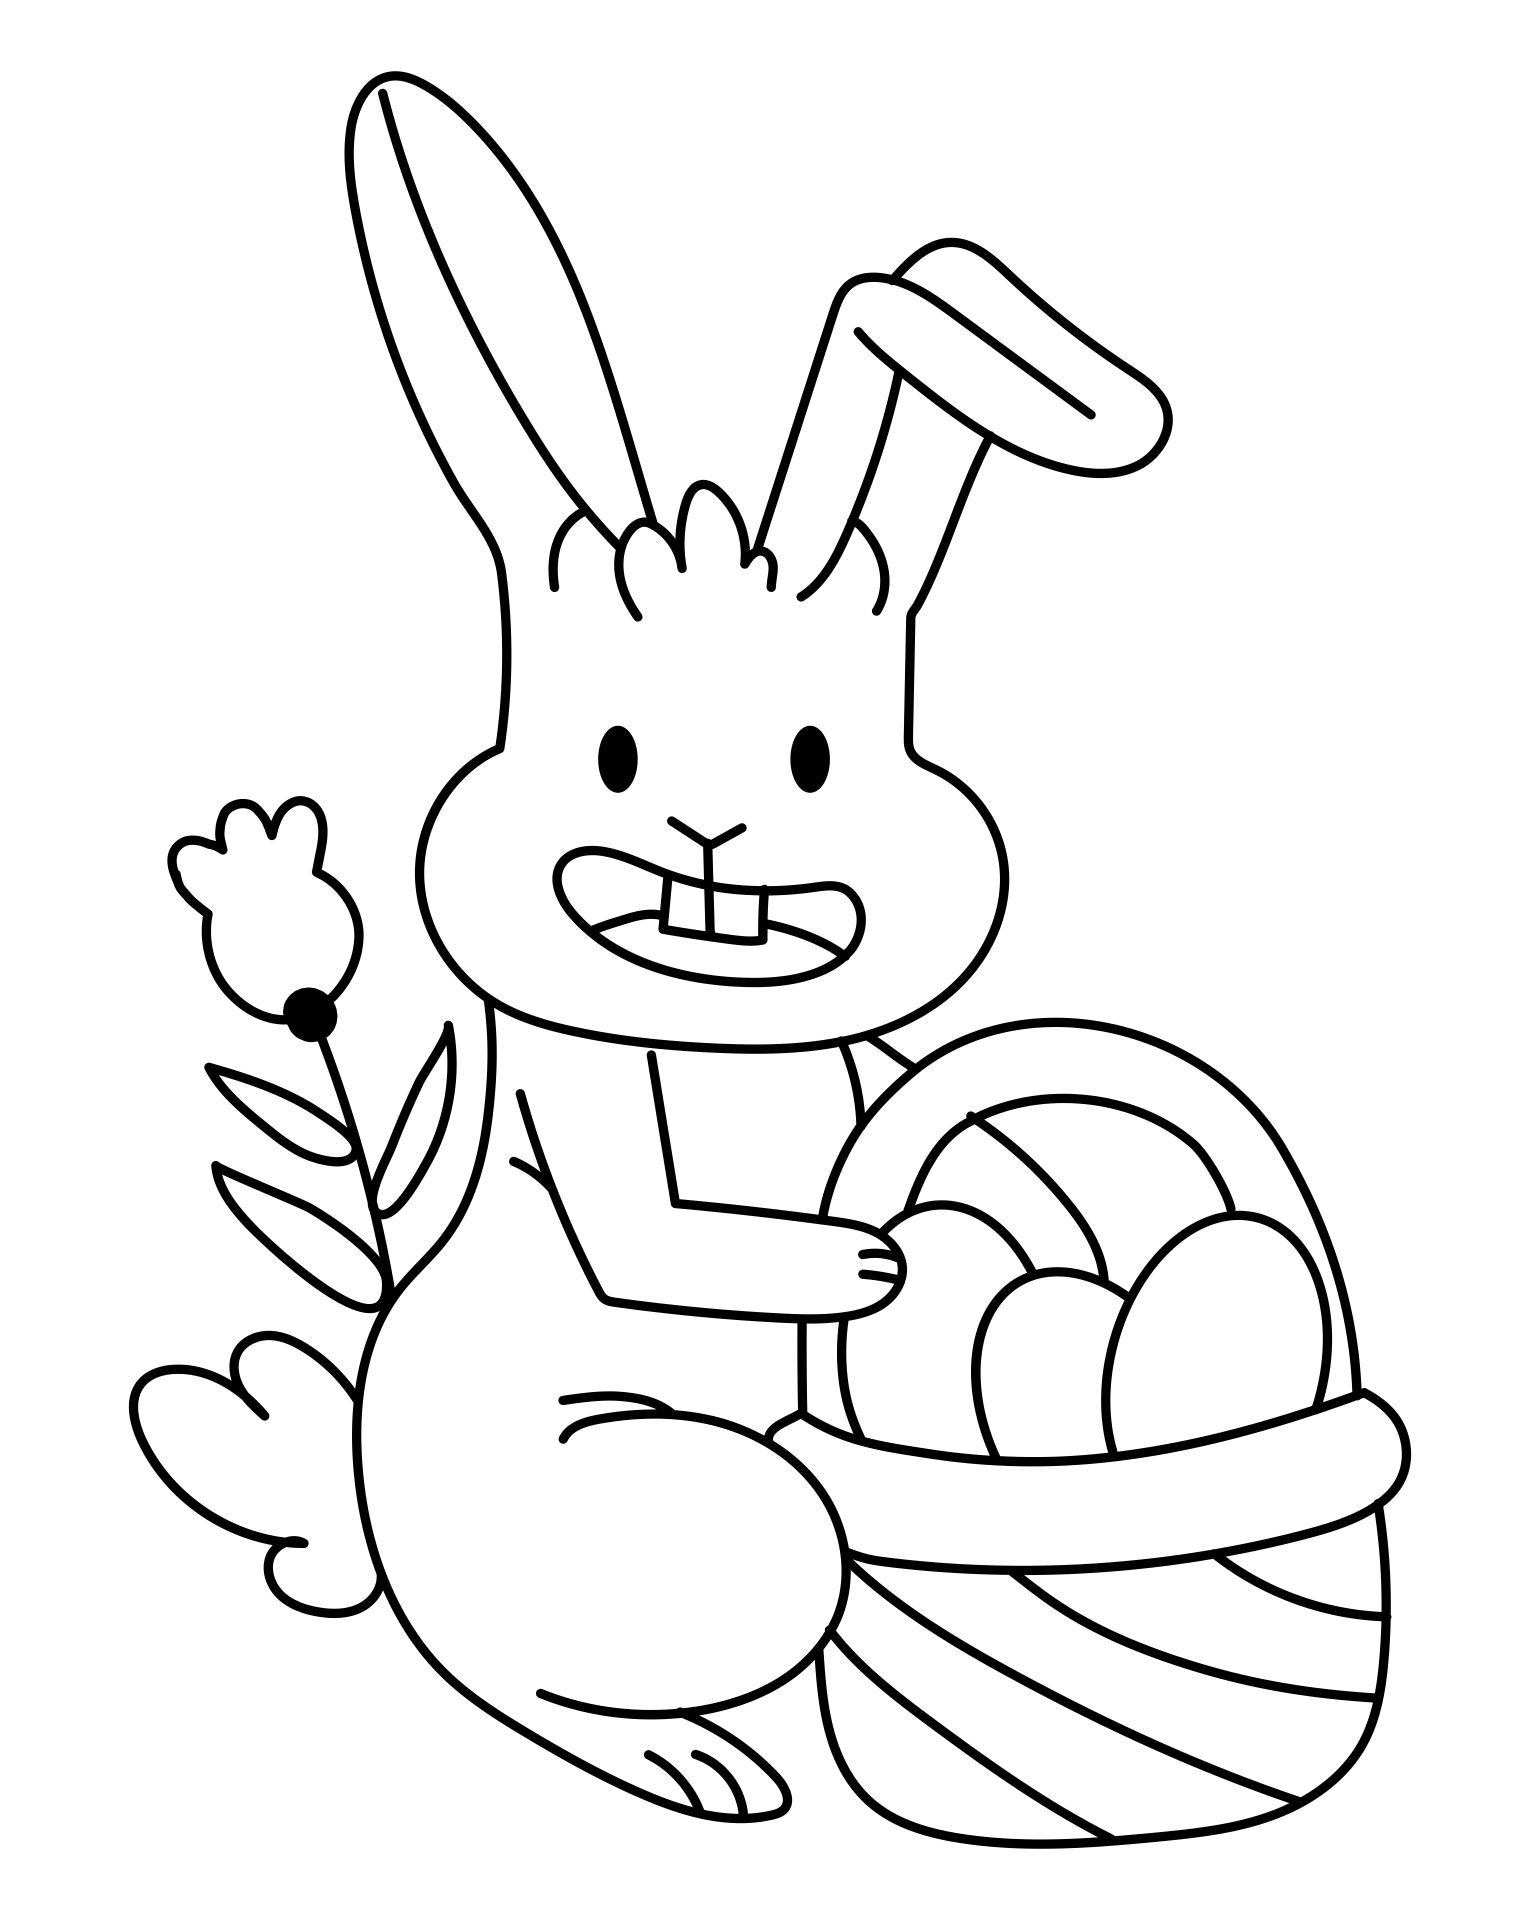 Different Printable Easter Bunnies